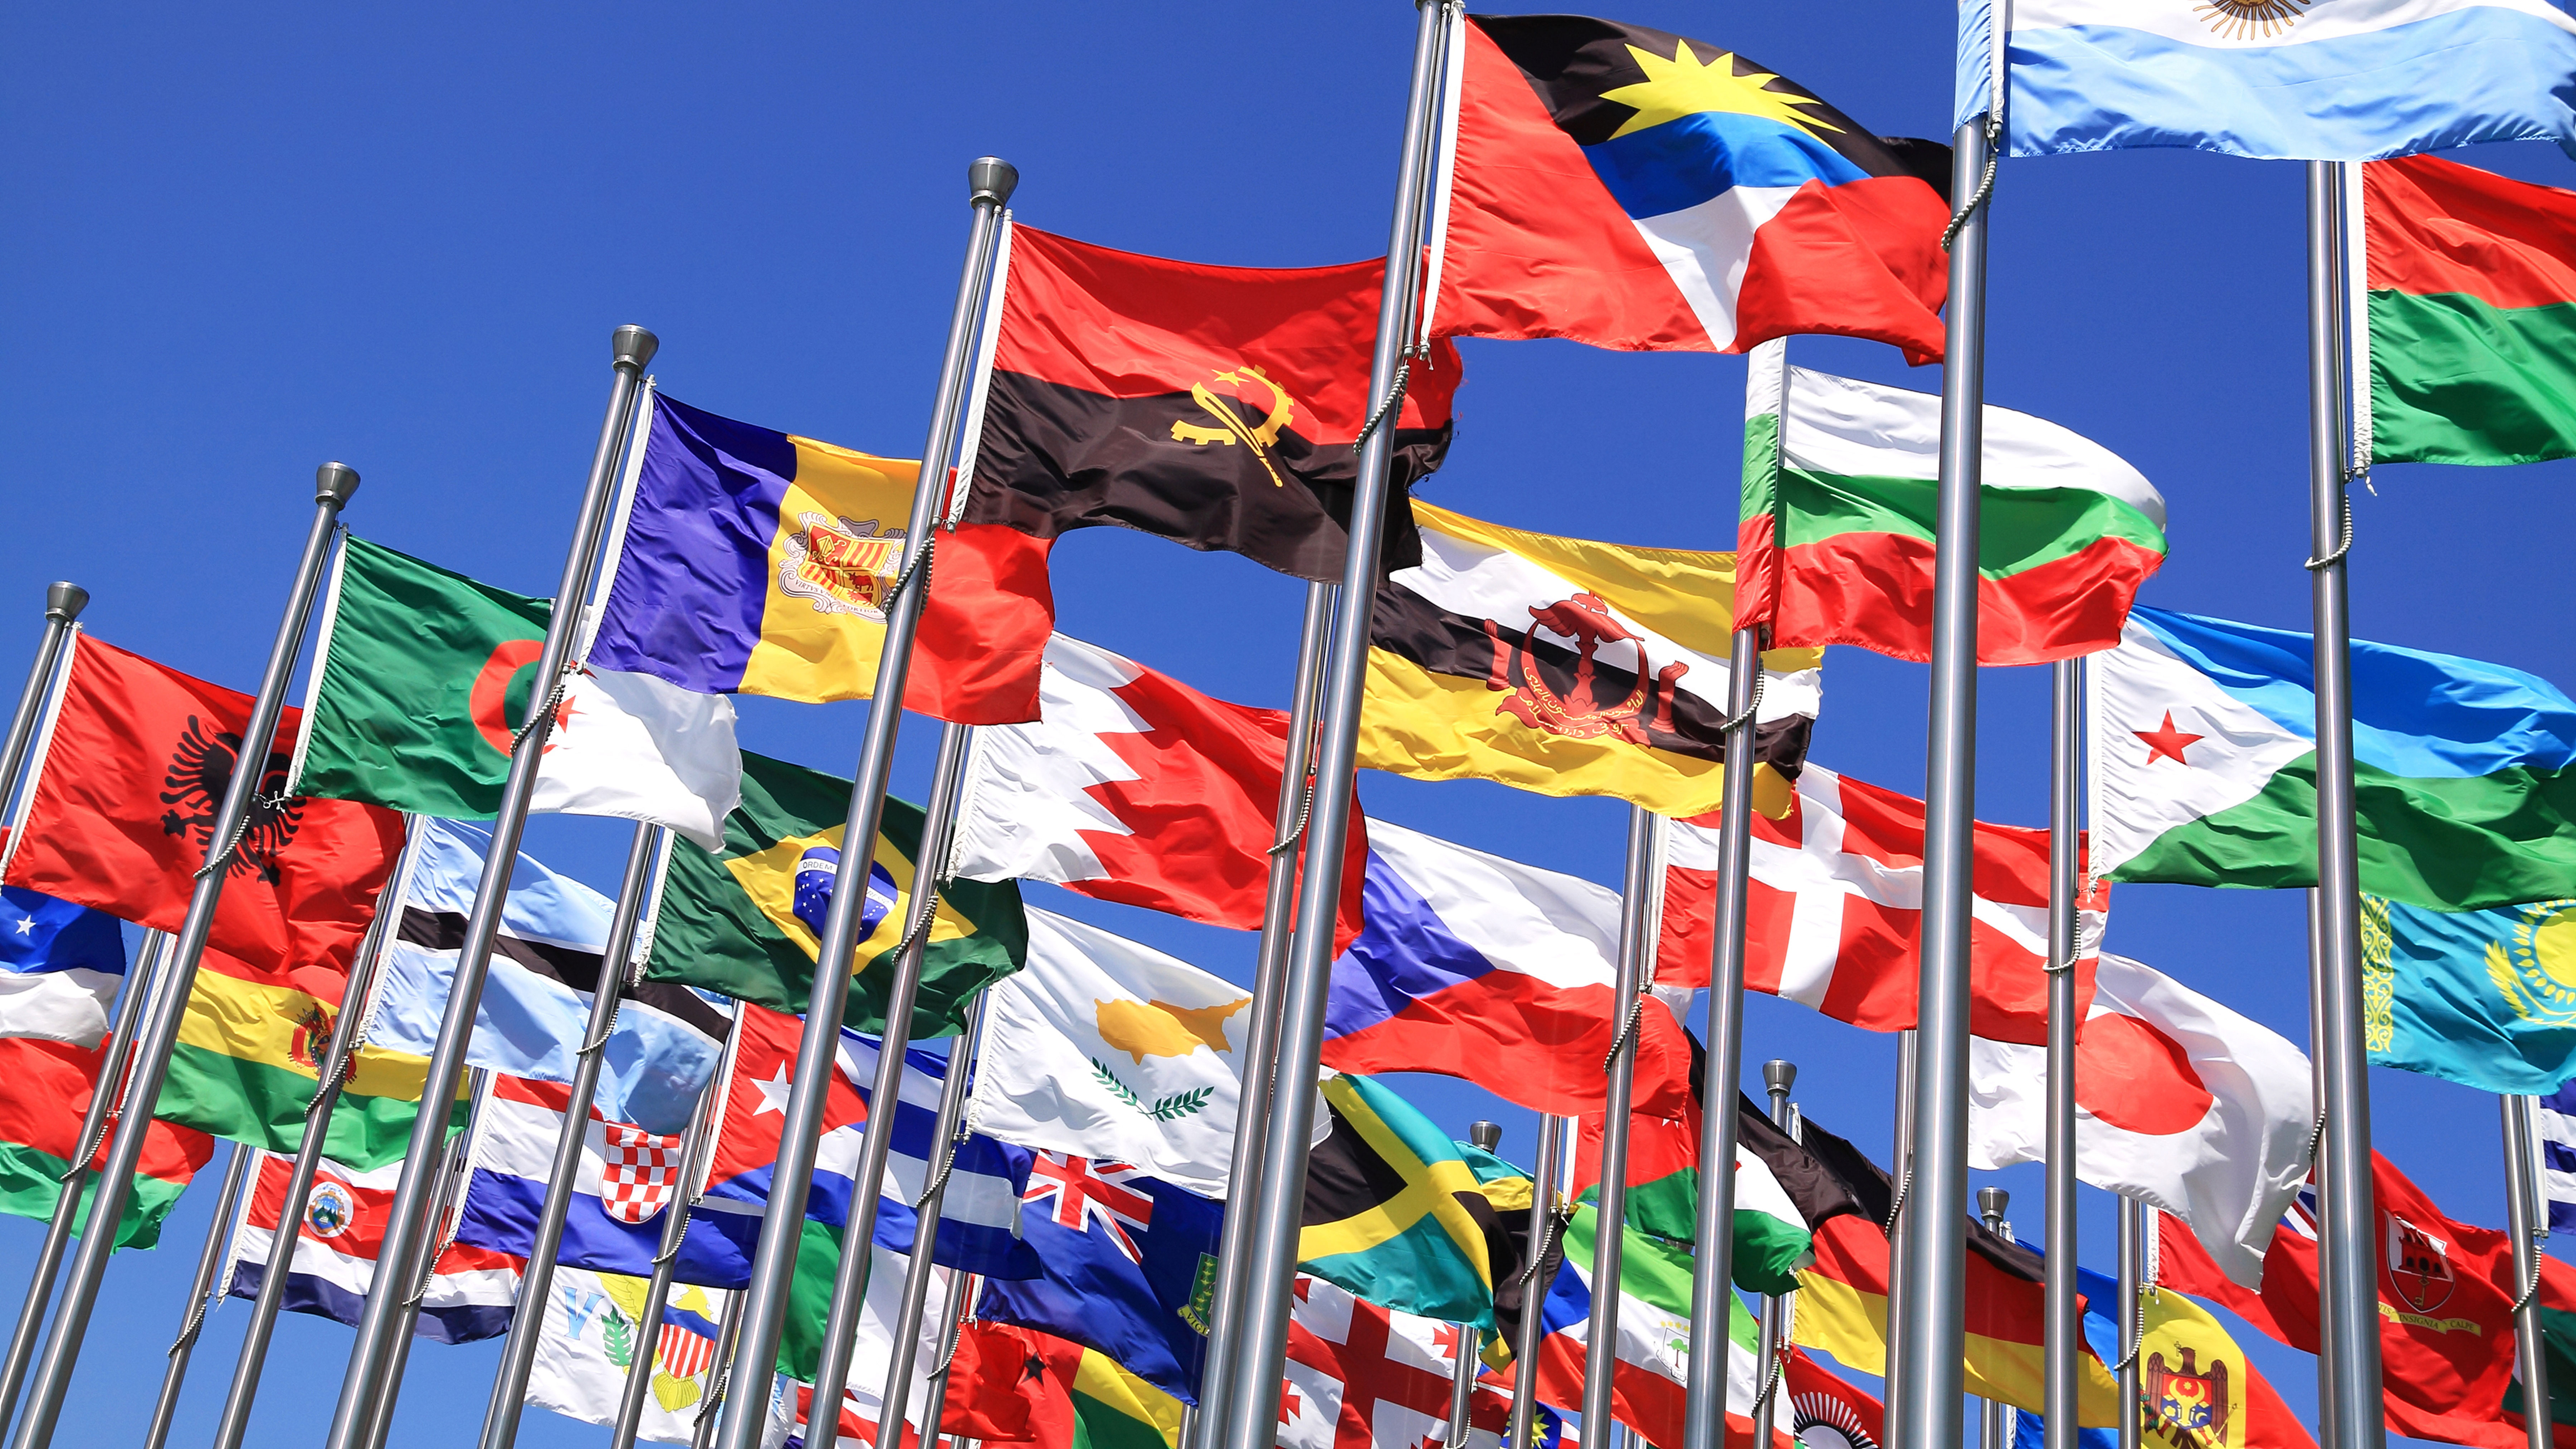 Many flags of different countries.